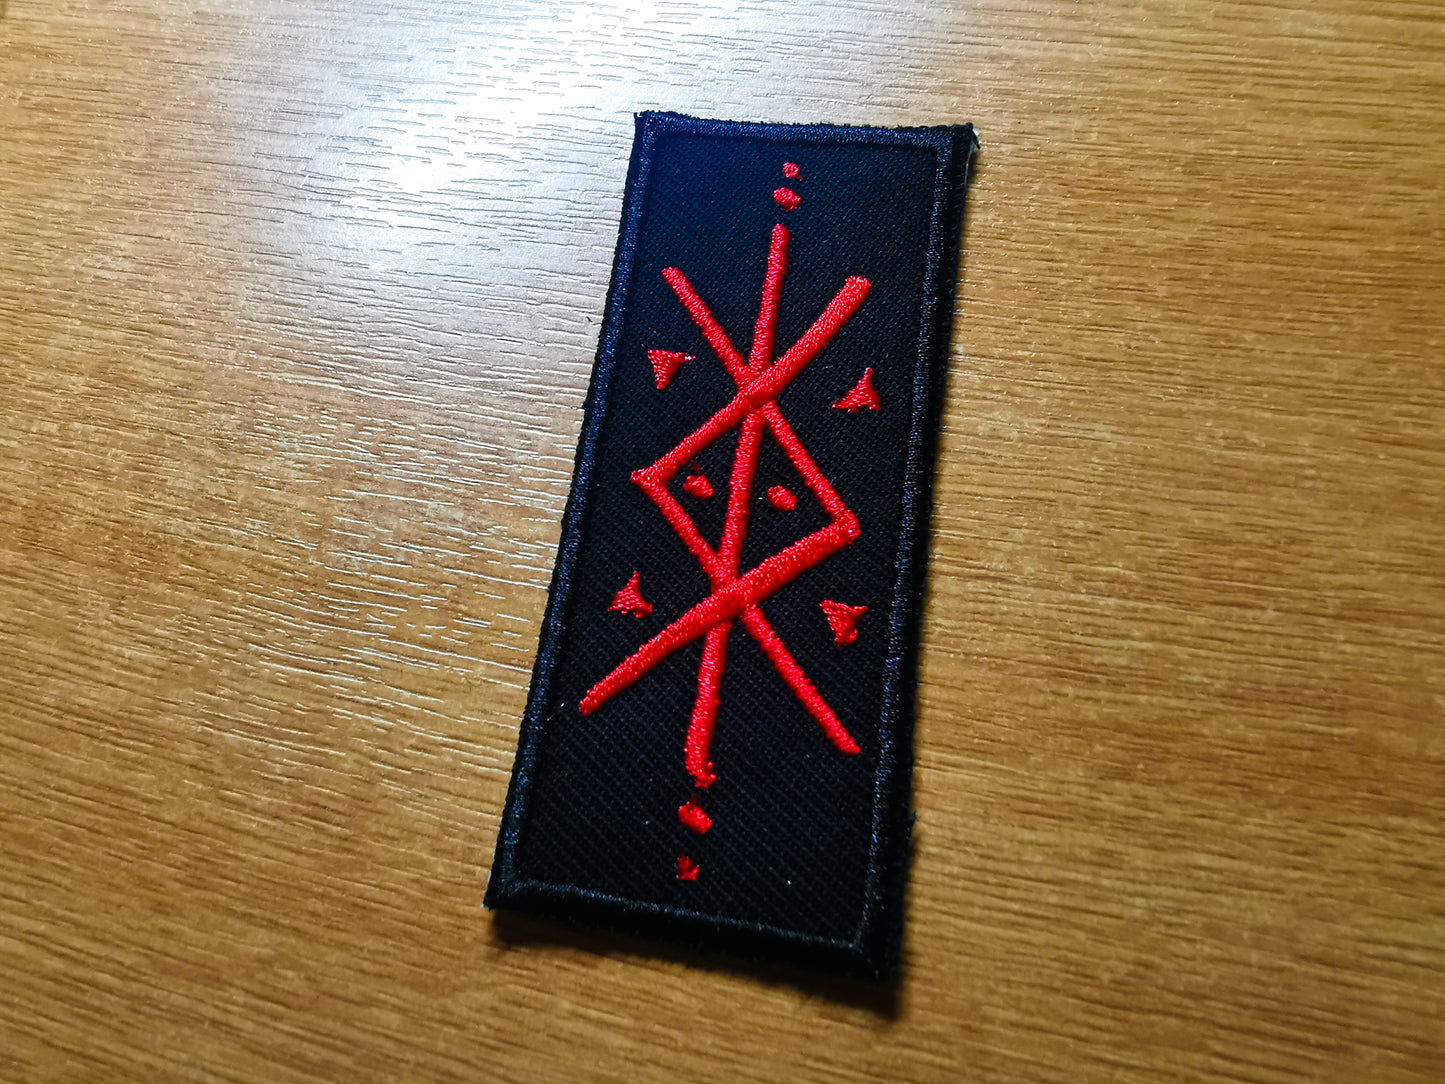 Protection Bindrune Embroidered Patch Red